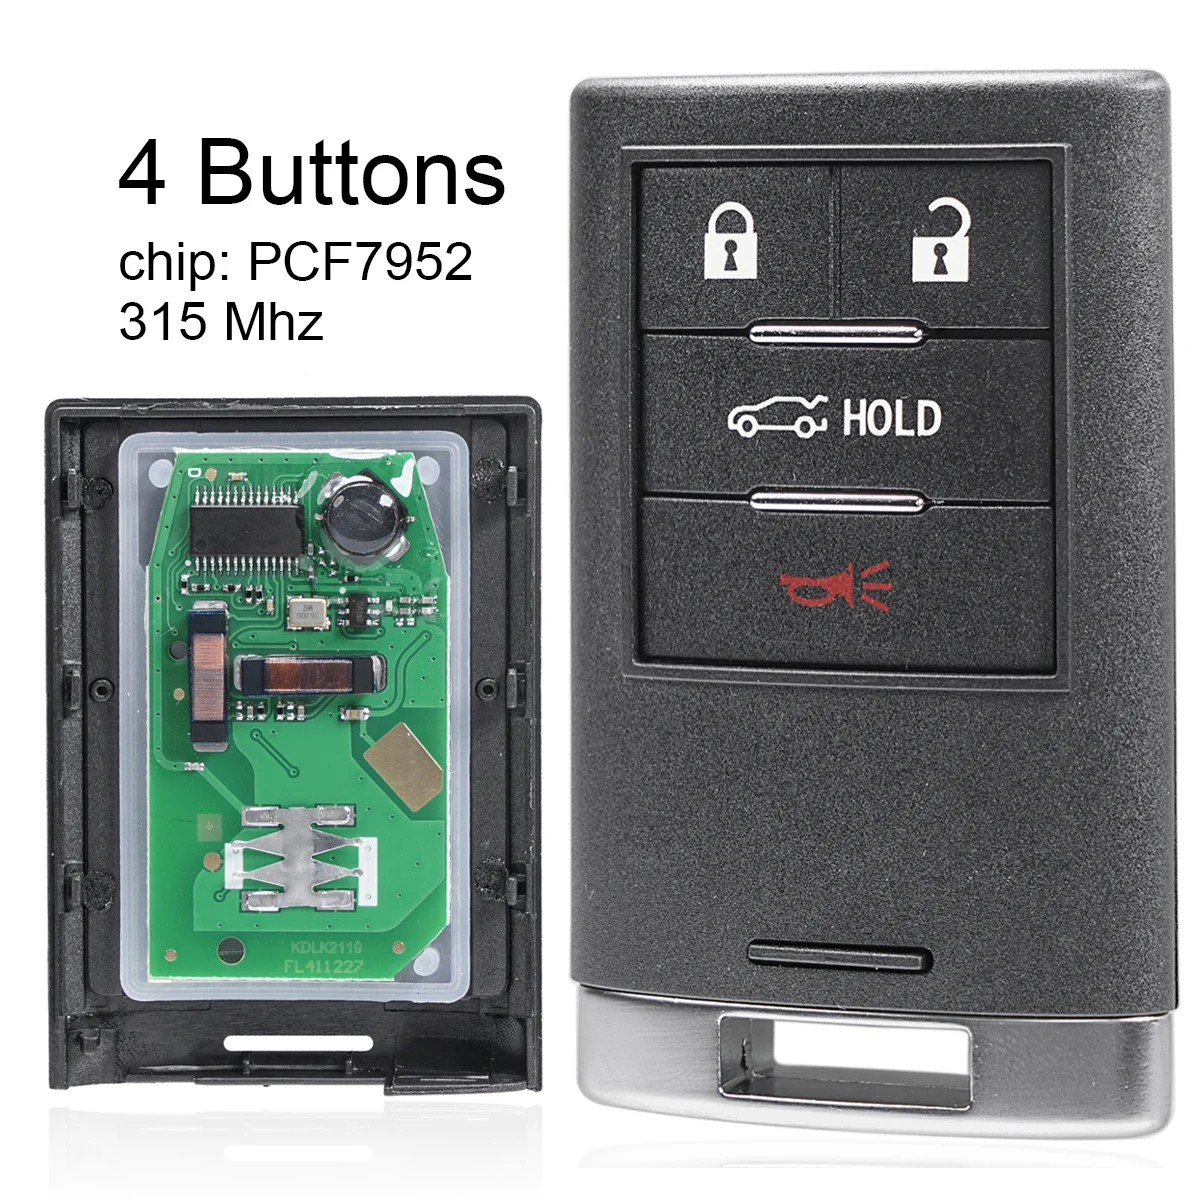 

4 Buttons 315MHz Keyless Smart Remote Car Key Fob with PCF7952 Chip NBG009768T Key Replacement for Cadillac- Cars Vehicle